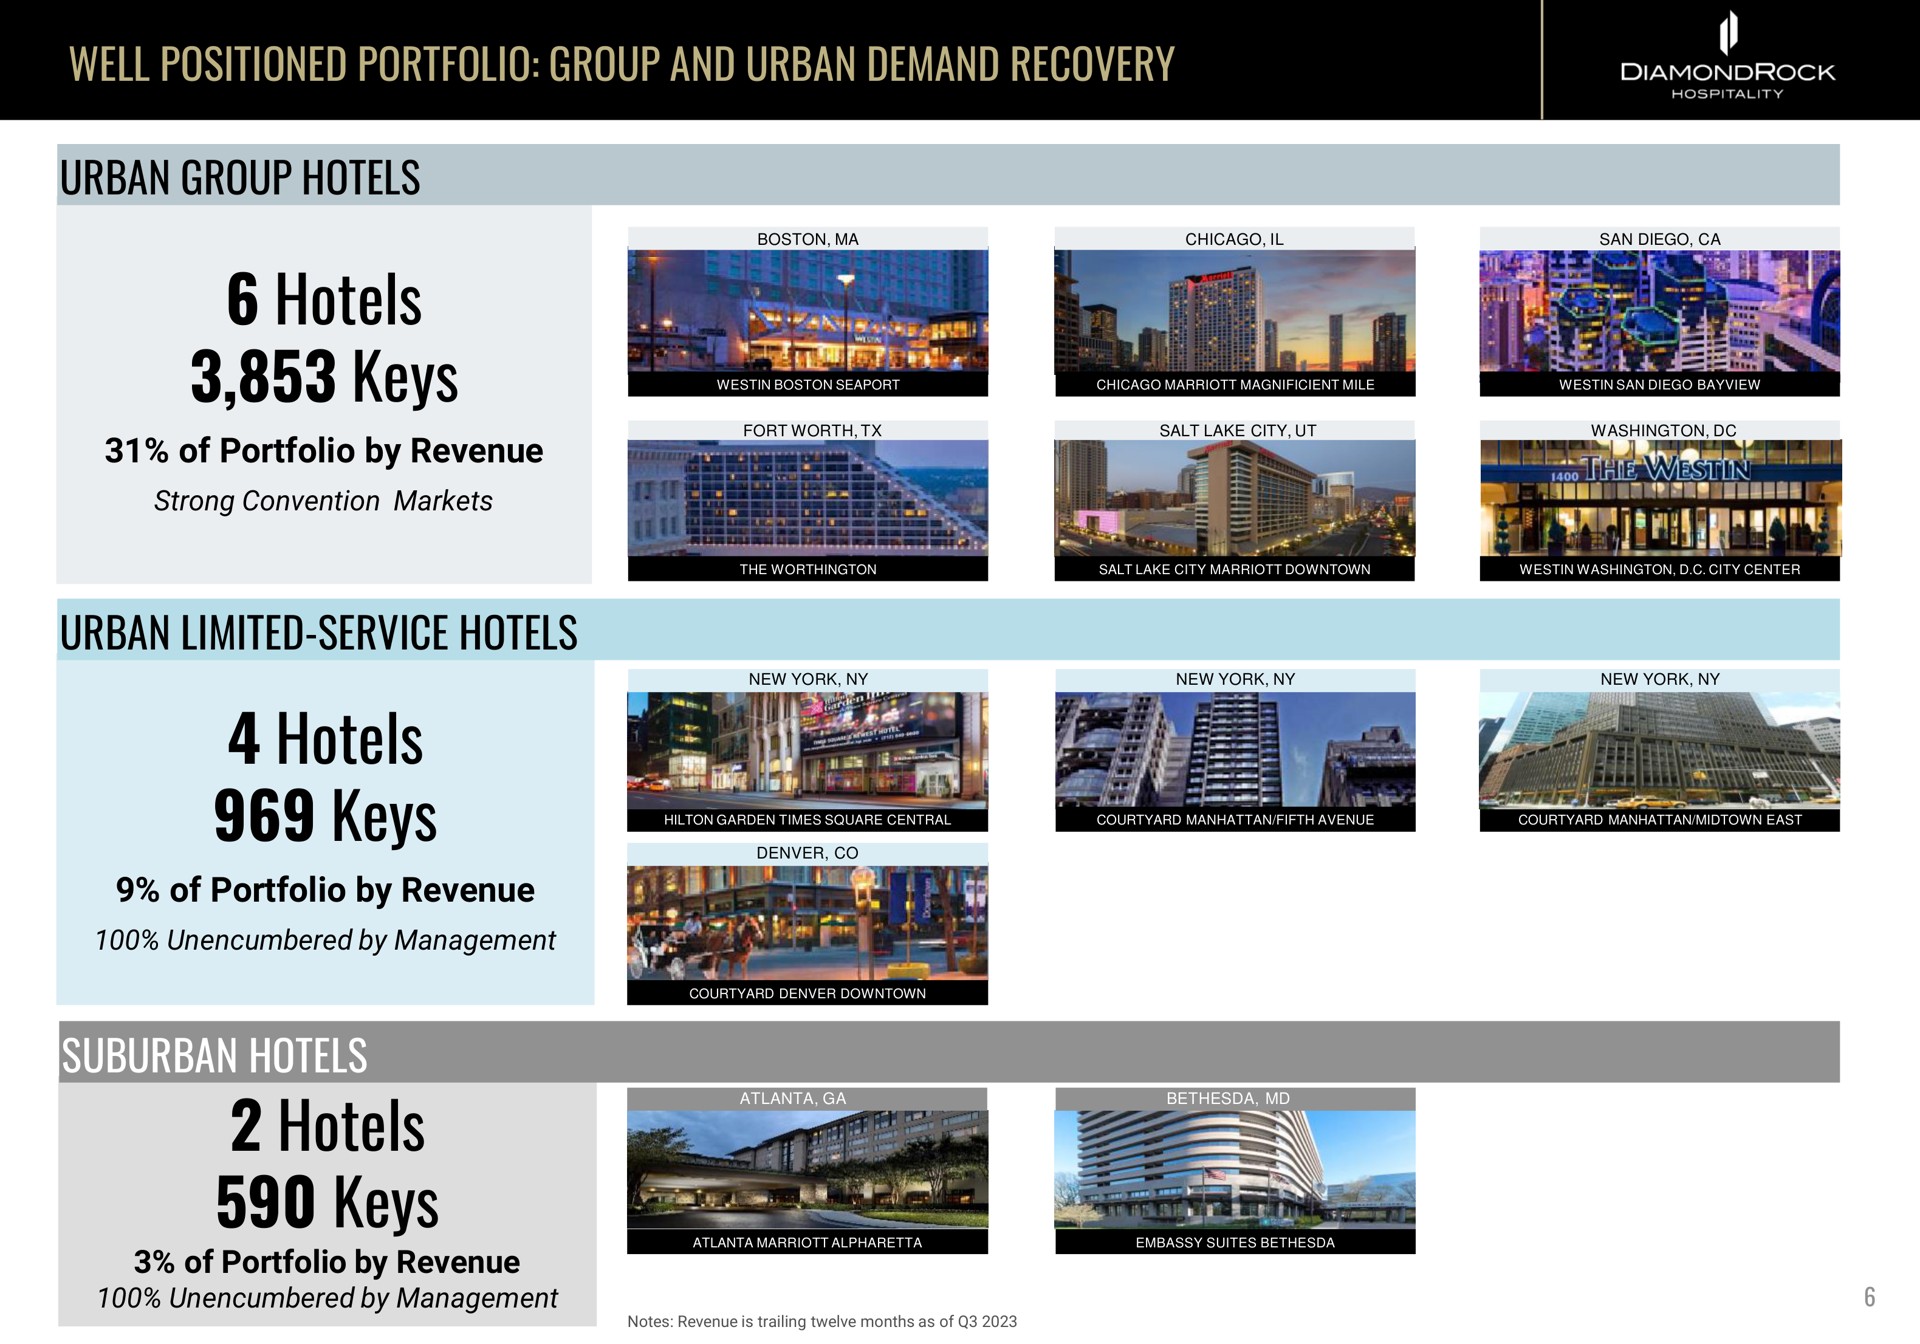 well positioned portfolio group and urban demand recovery urban group hotels hotels keys urban limited service hotels hotels keys suburban hotels hotels keys at of by revenue i | DiamondRock Hospitality